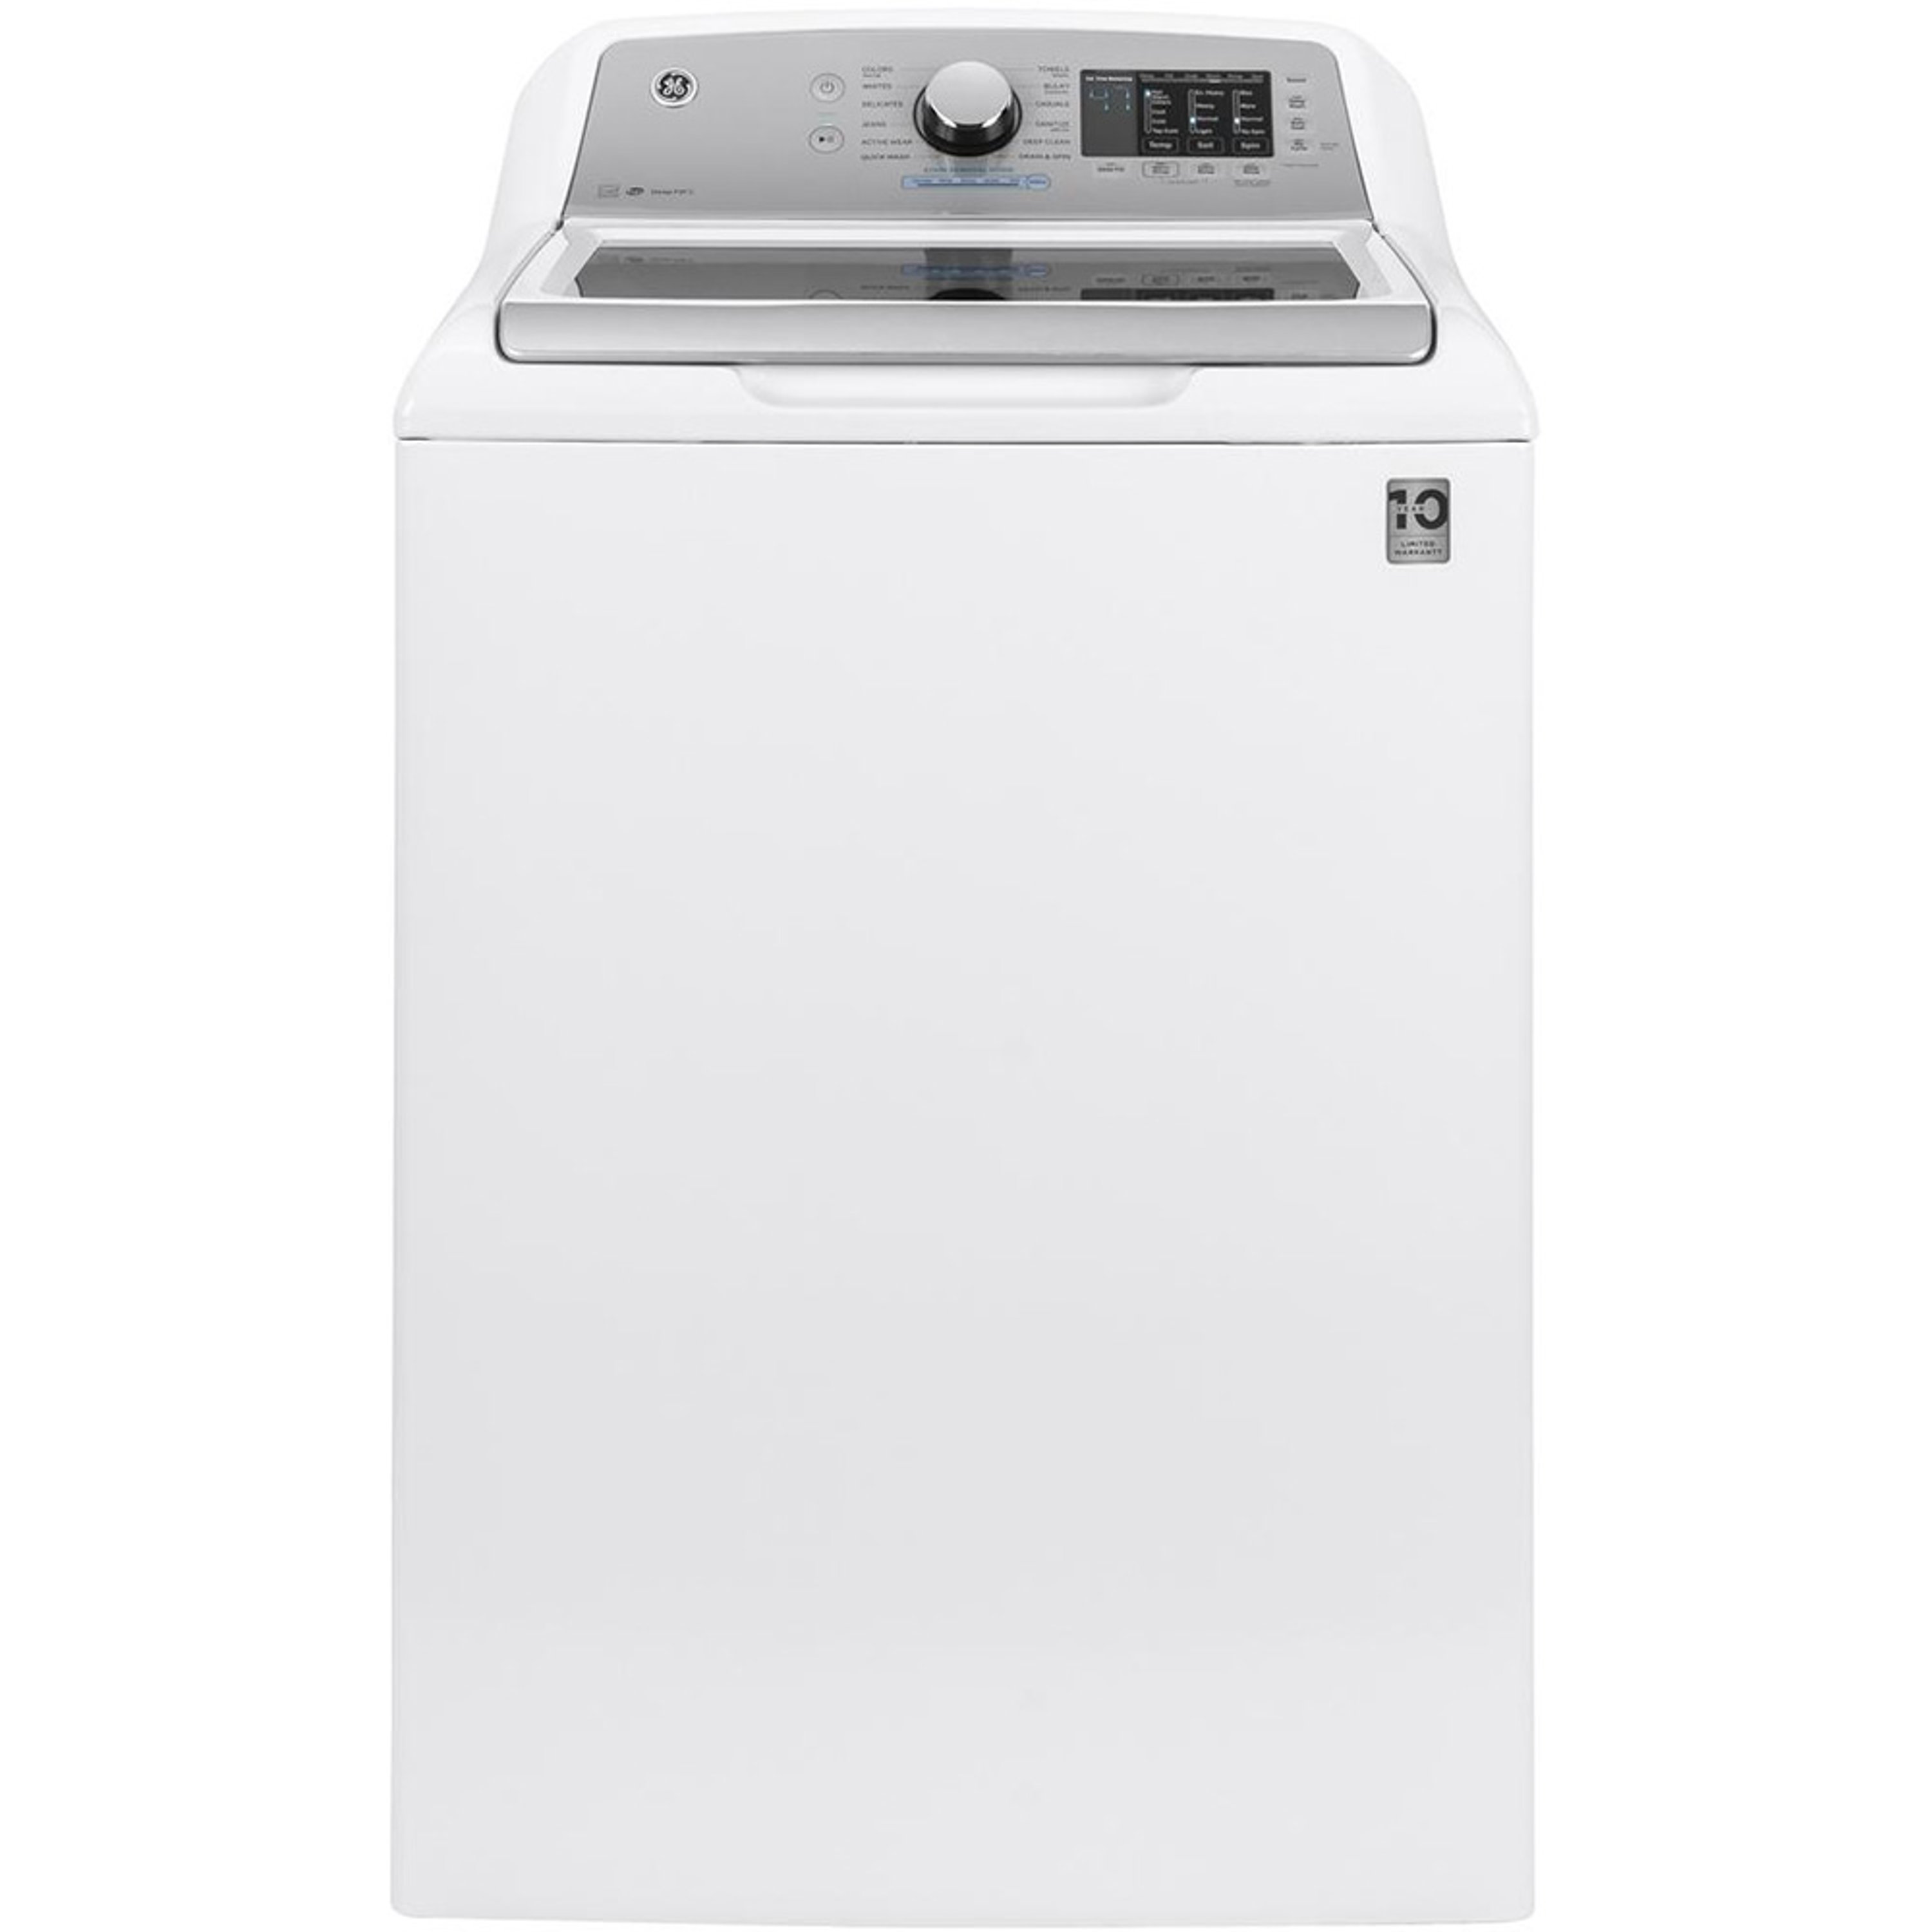 GE GE 4.6 CU. FT. WHITE TOP LOAD ELECTRIC WASHER